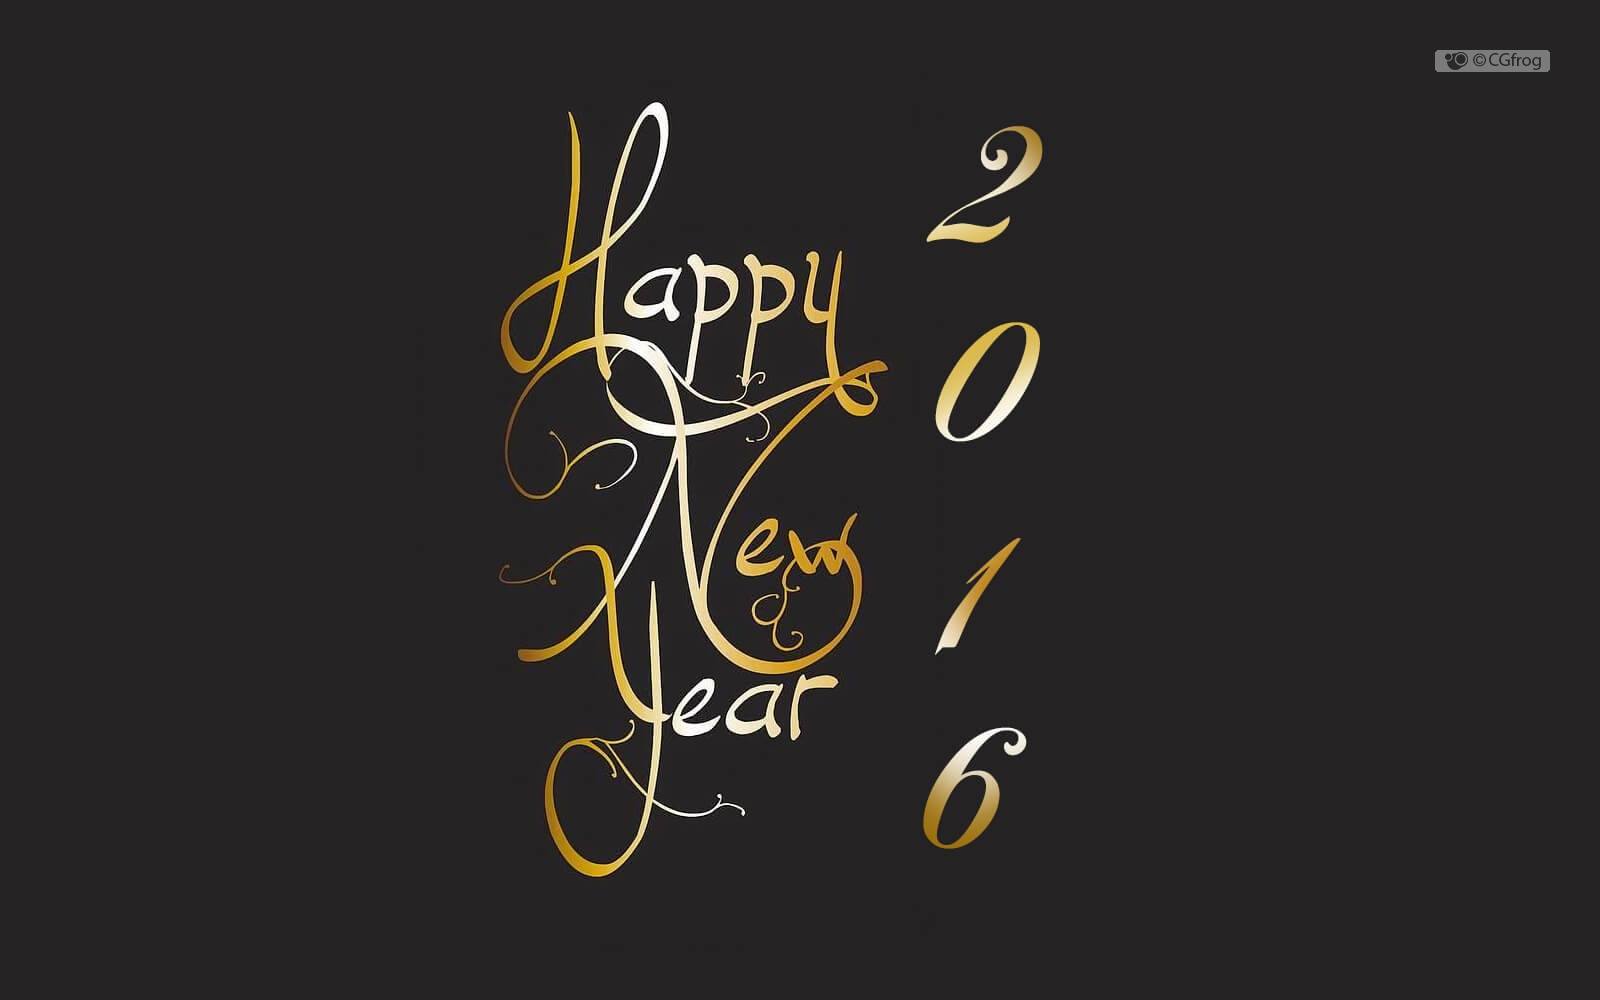 2016 Happy New Year Typography Graphic Design Wallpaper for computer